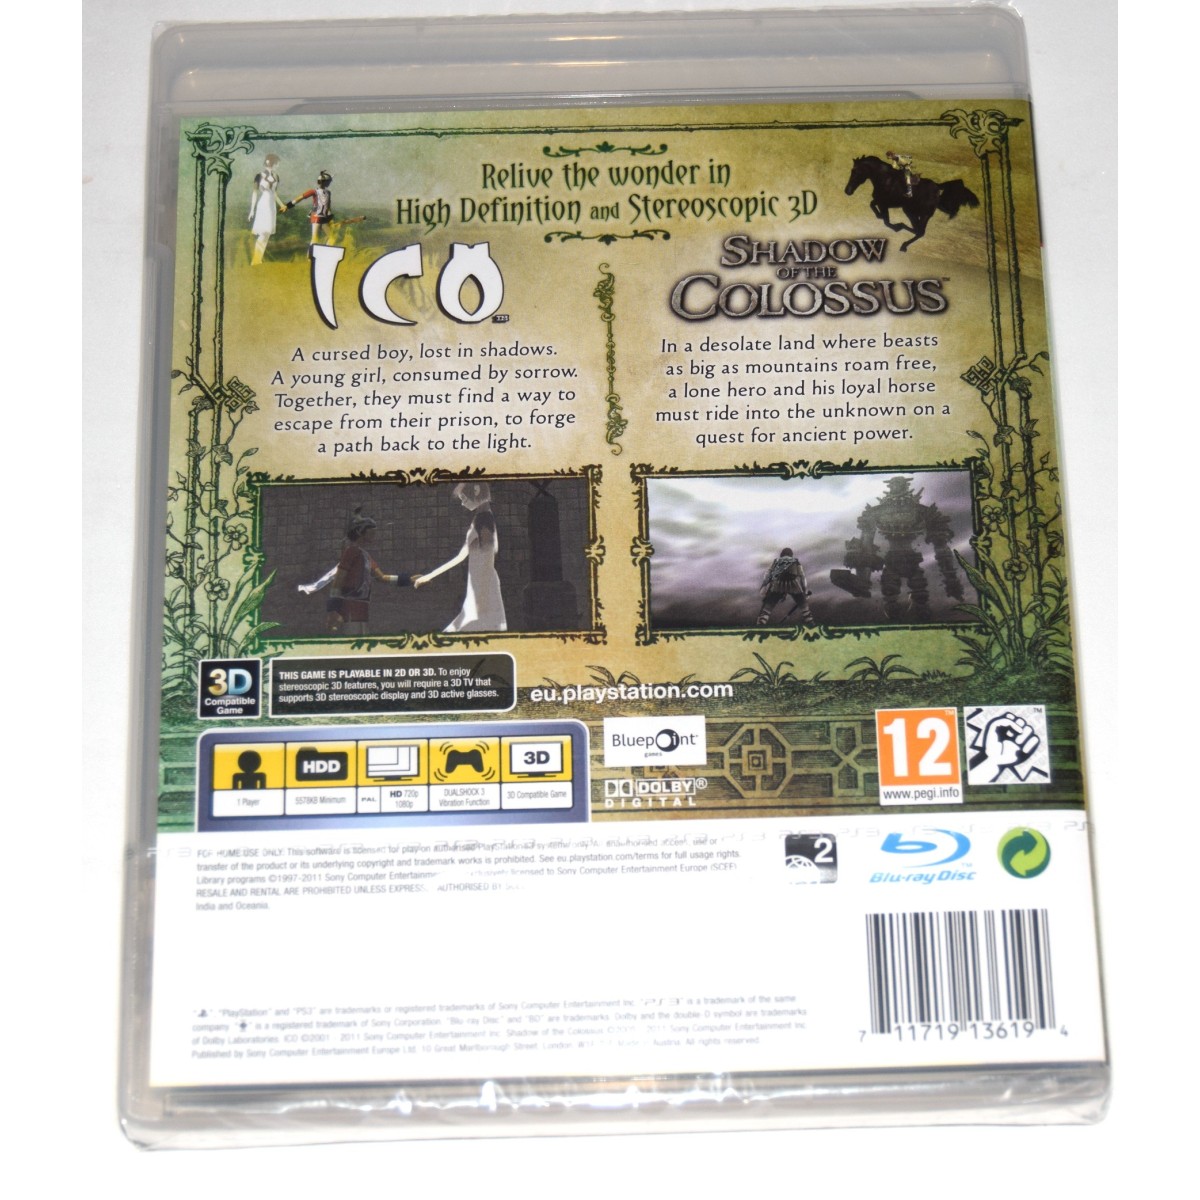 Ico y shadow of the colossus ps3 d'occasion pour 35 EUR in Móstoles sur  WALLAPOP